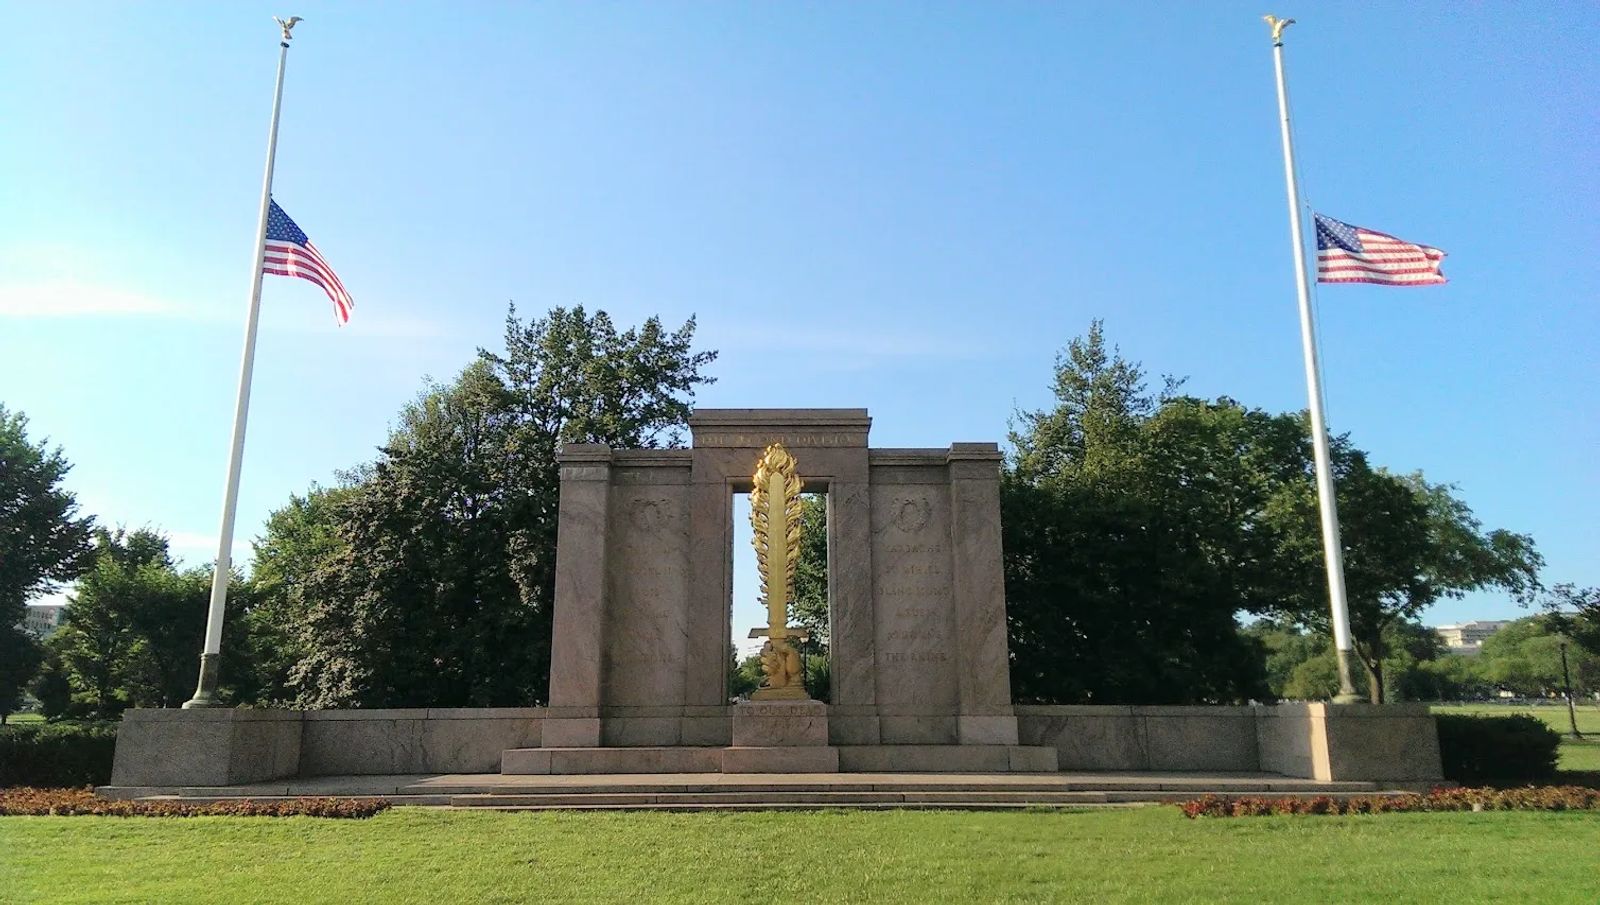 Photo of the Second Division Memorial in Washington, DC